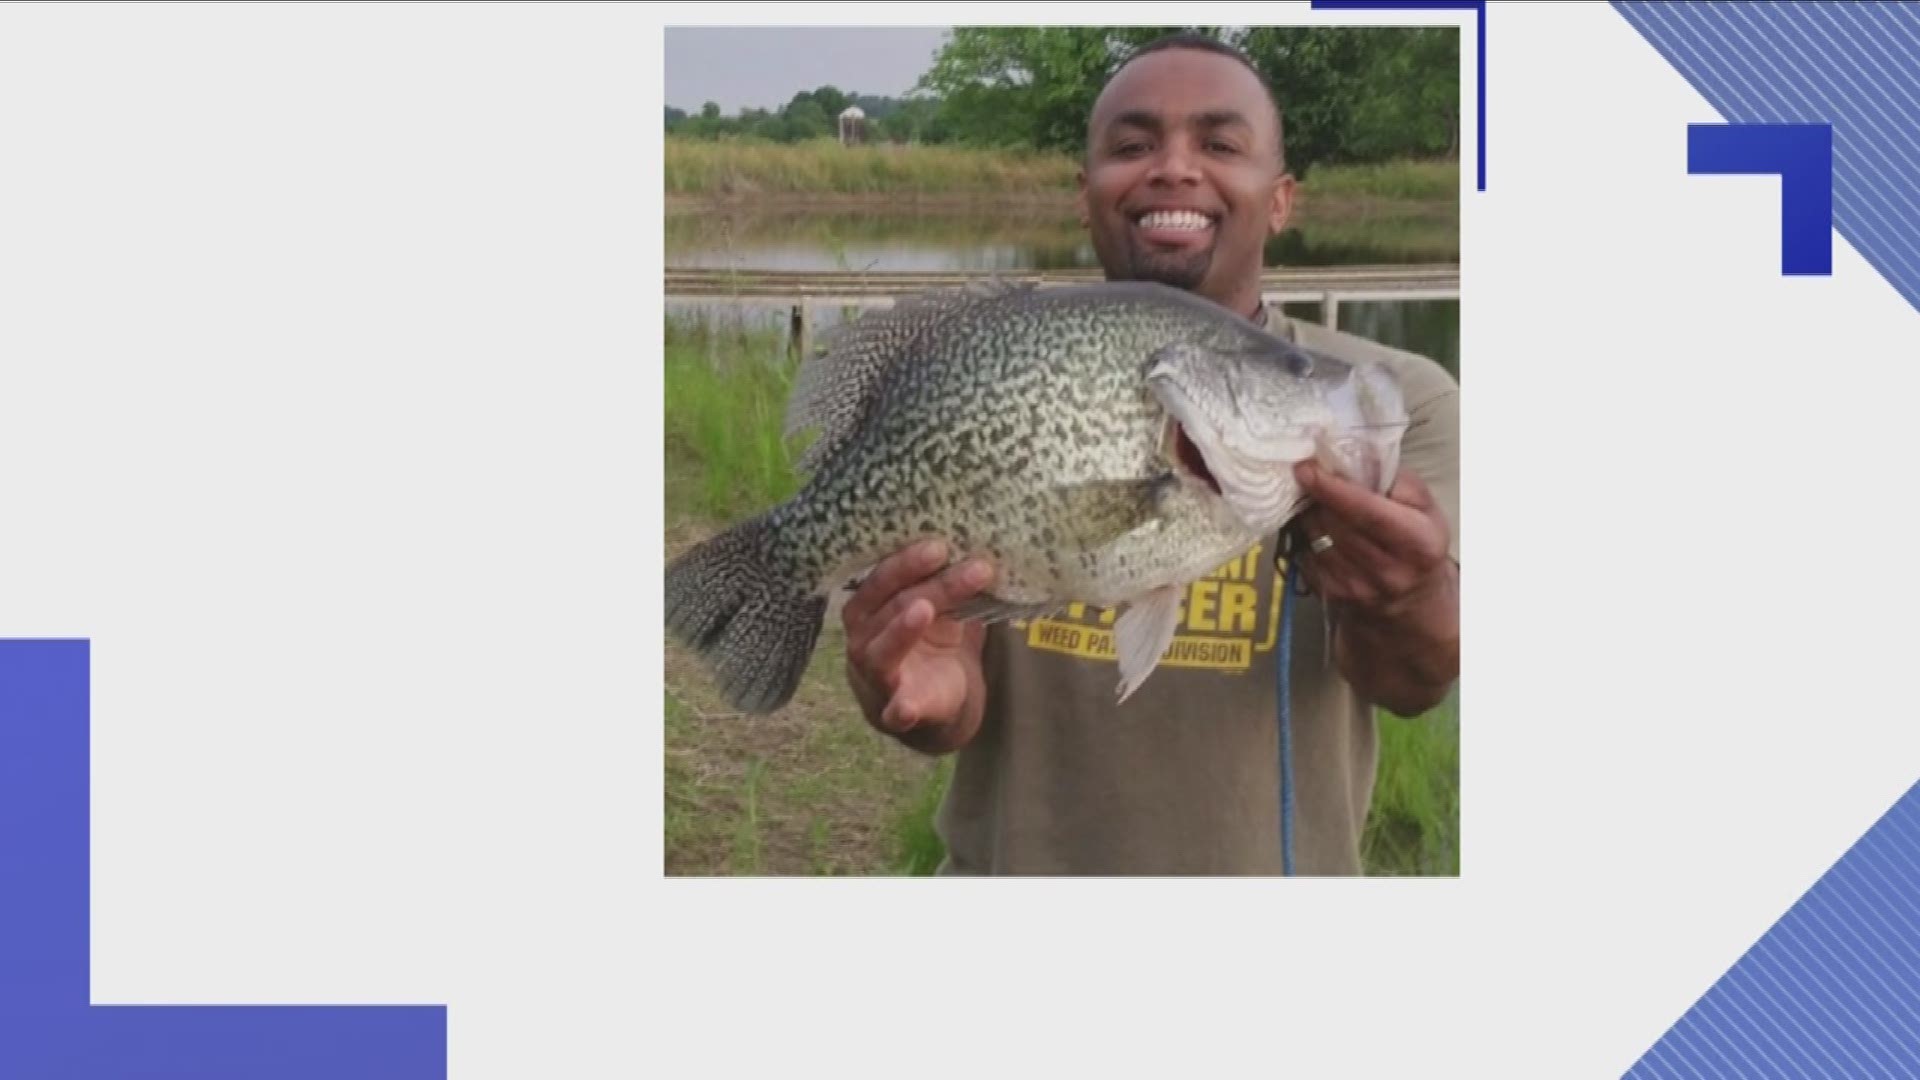 An East Tennessee angler officially broke the world record with his black crappie catch.